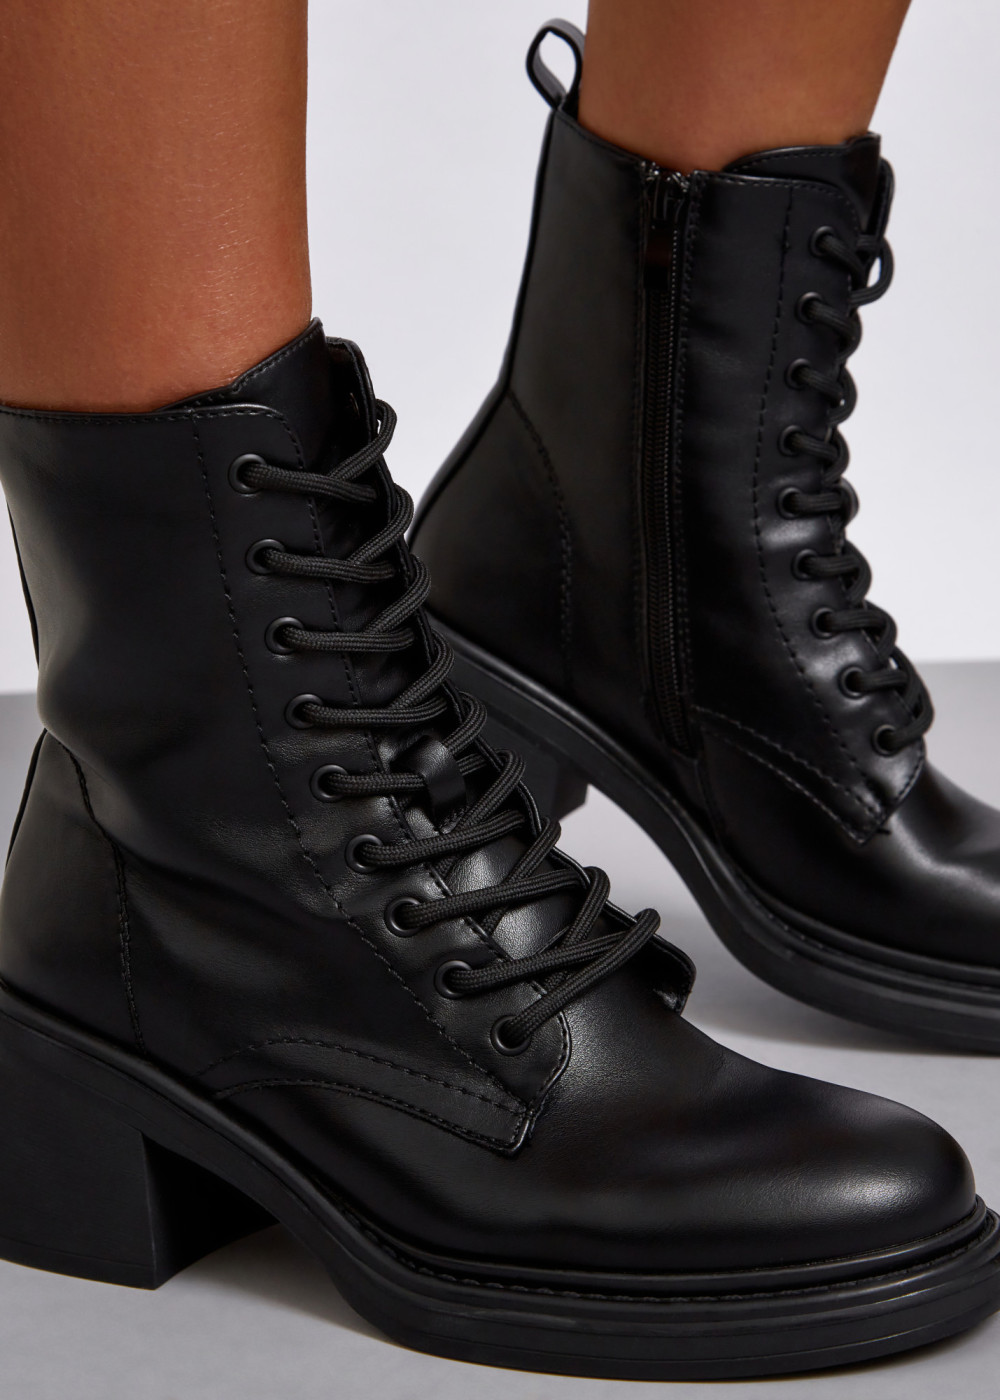 Black lace up heeled ankle boots 2